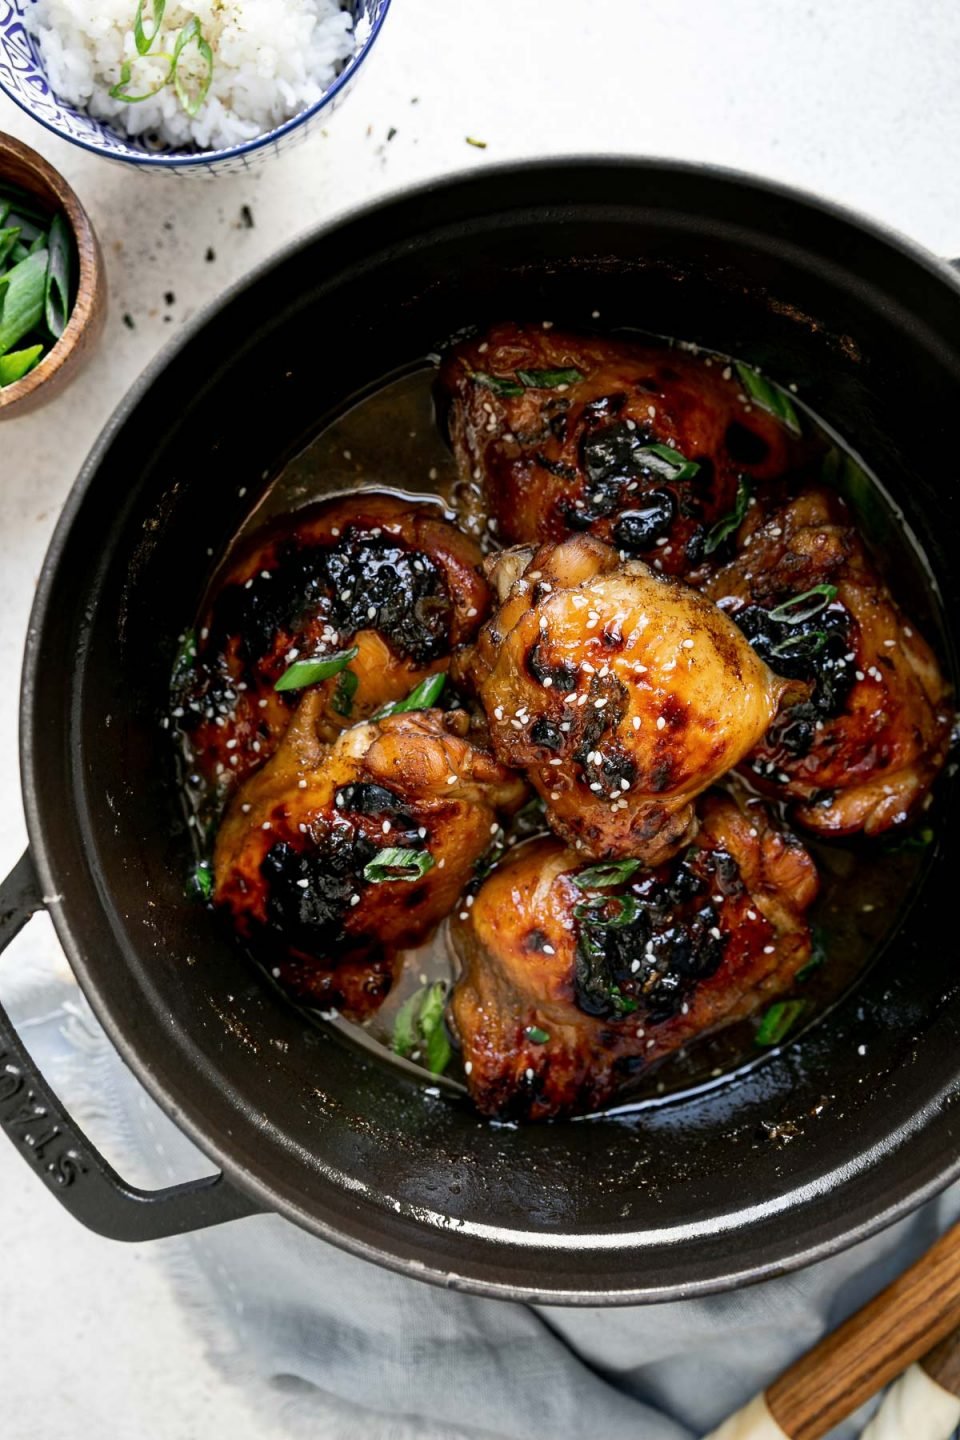 Shoyu chicken in a black dutch oven atop a white surface. The chicken is garnished with sliced green onions & sesame seeds. The dutch oven is surrounded by a blue linen napkin & serving spoons, & 2 small bowls, one filled with rice & the second with sliced green onions.